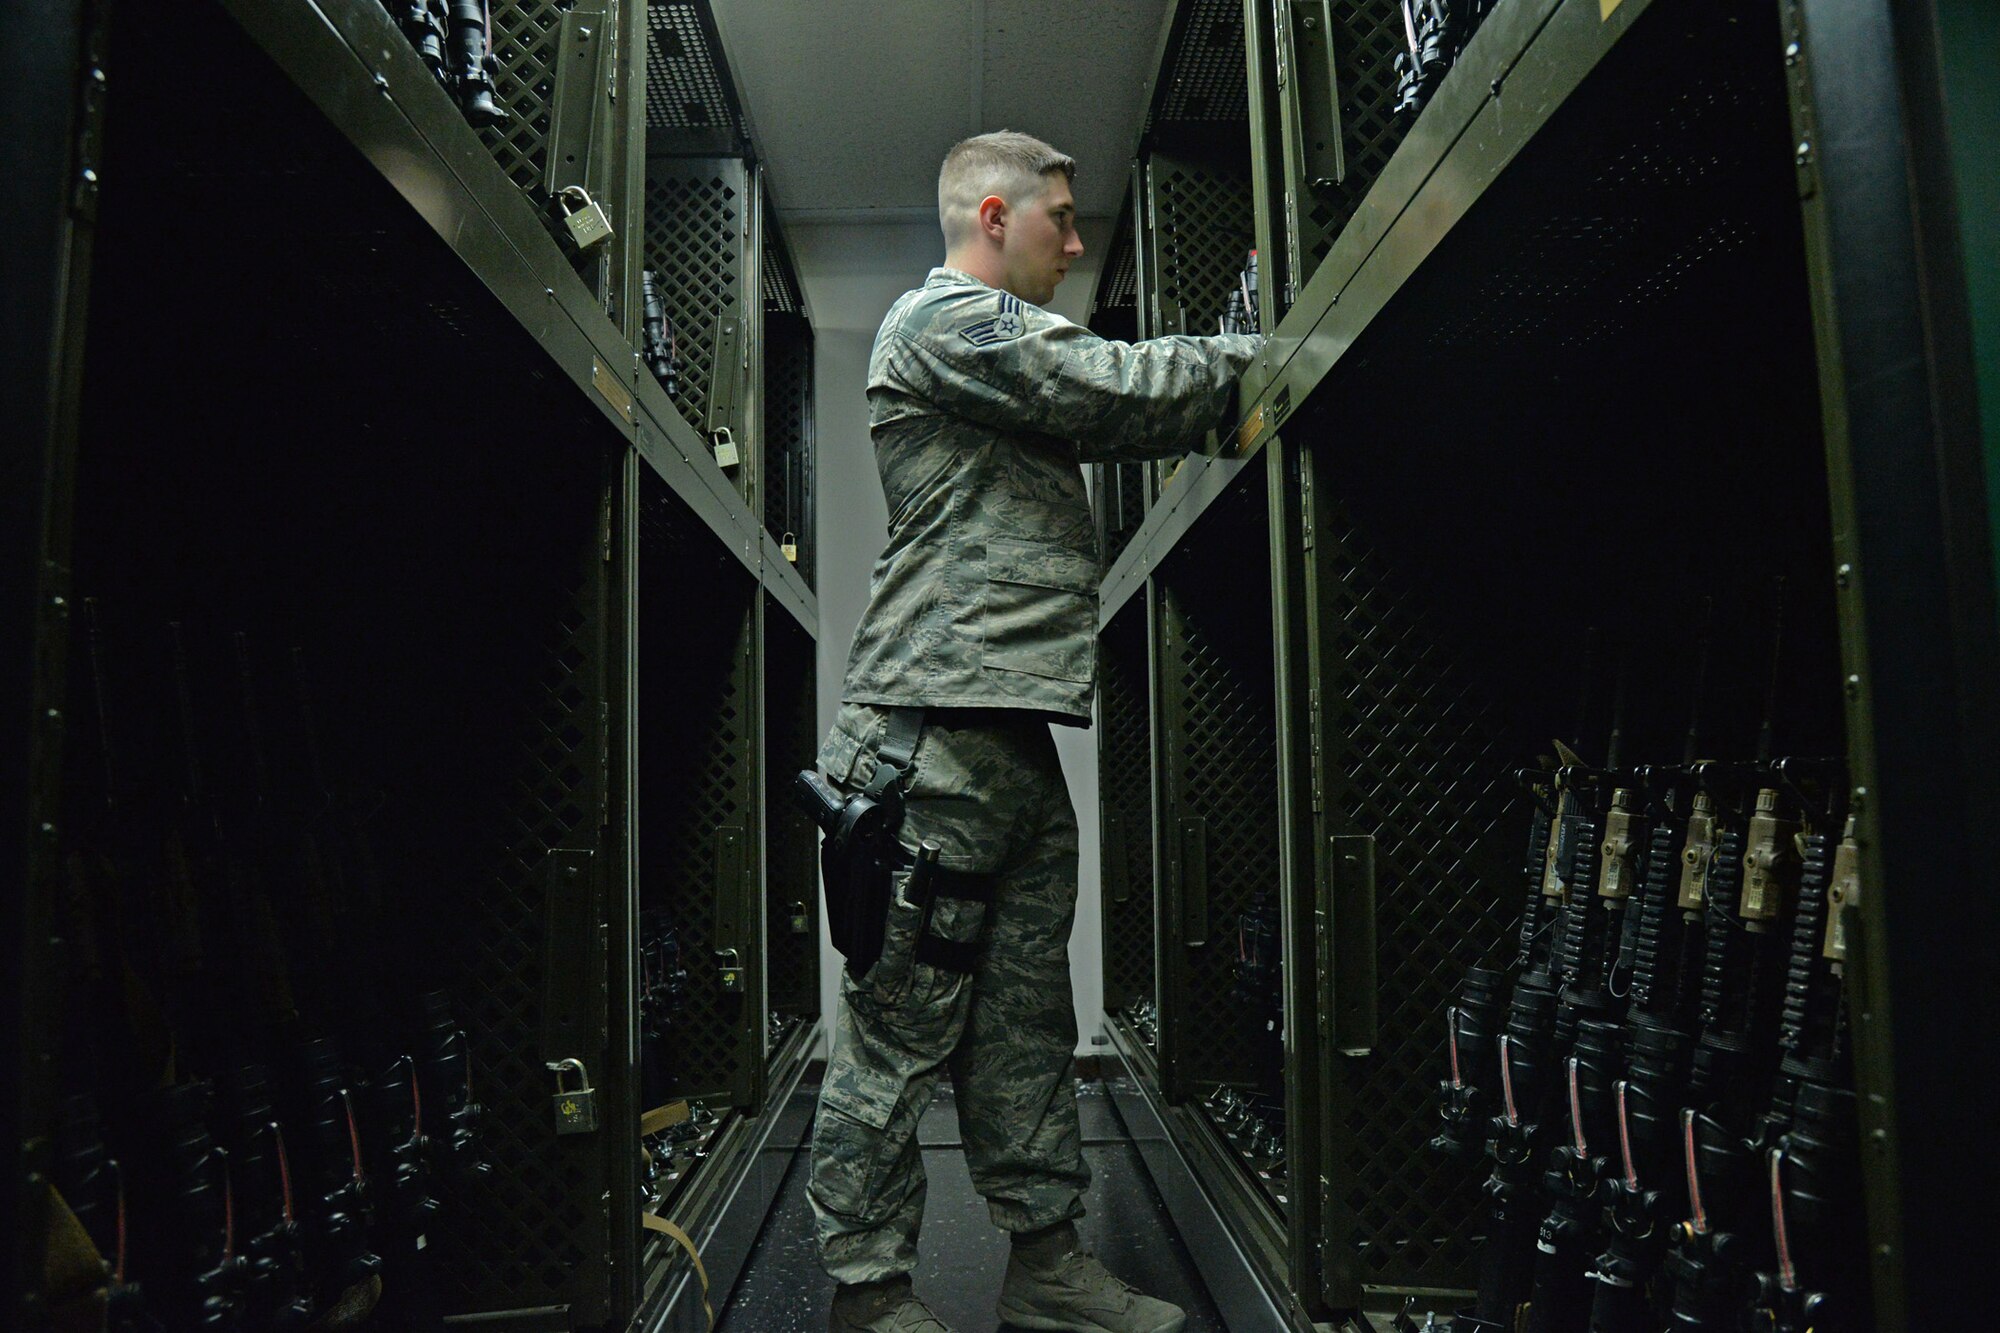 Senior Airman Tyler Merrill, 341st Security Forces Support Squadron armorer, inspects weapons June 14, 2017, at Malmstrom Air Force Base, Mont. Individuals may store their firearms in the security forces armory located in Building 500. (U.S. Air Force photo/Airman 1st Class Daniel Brosam)